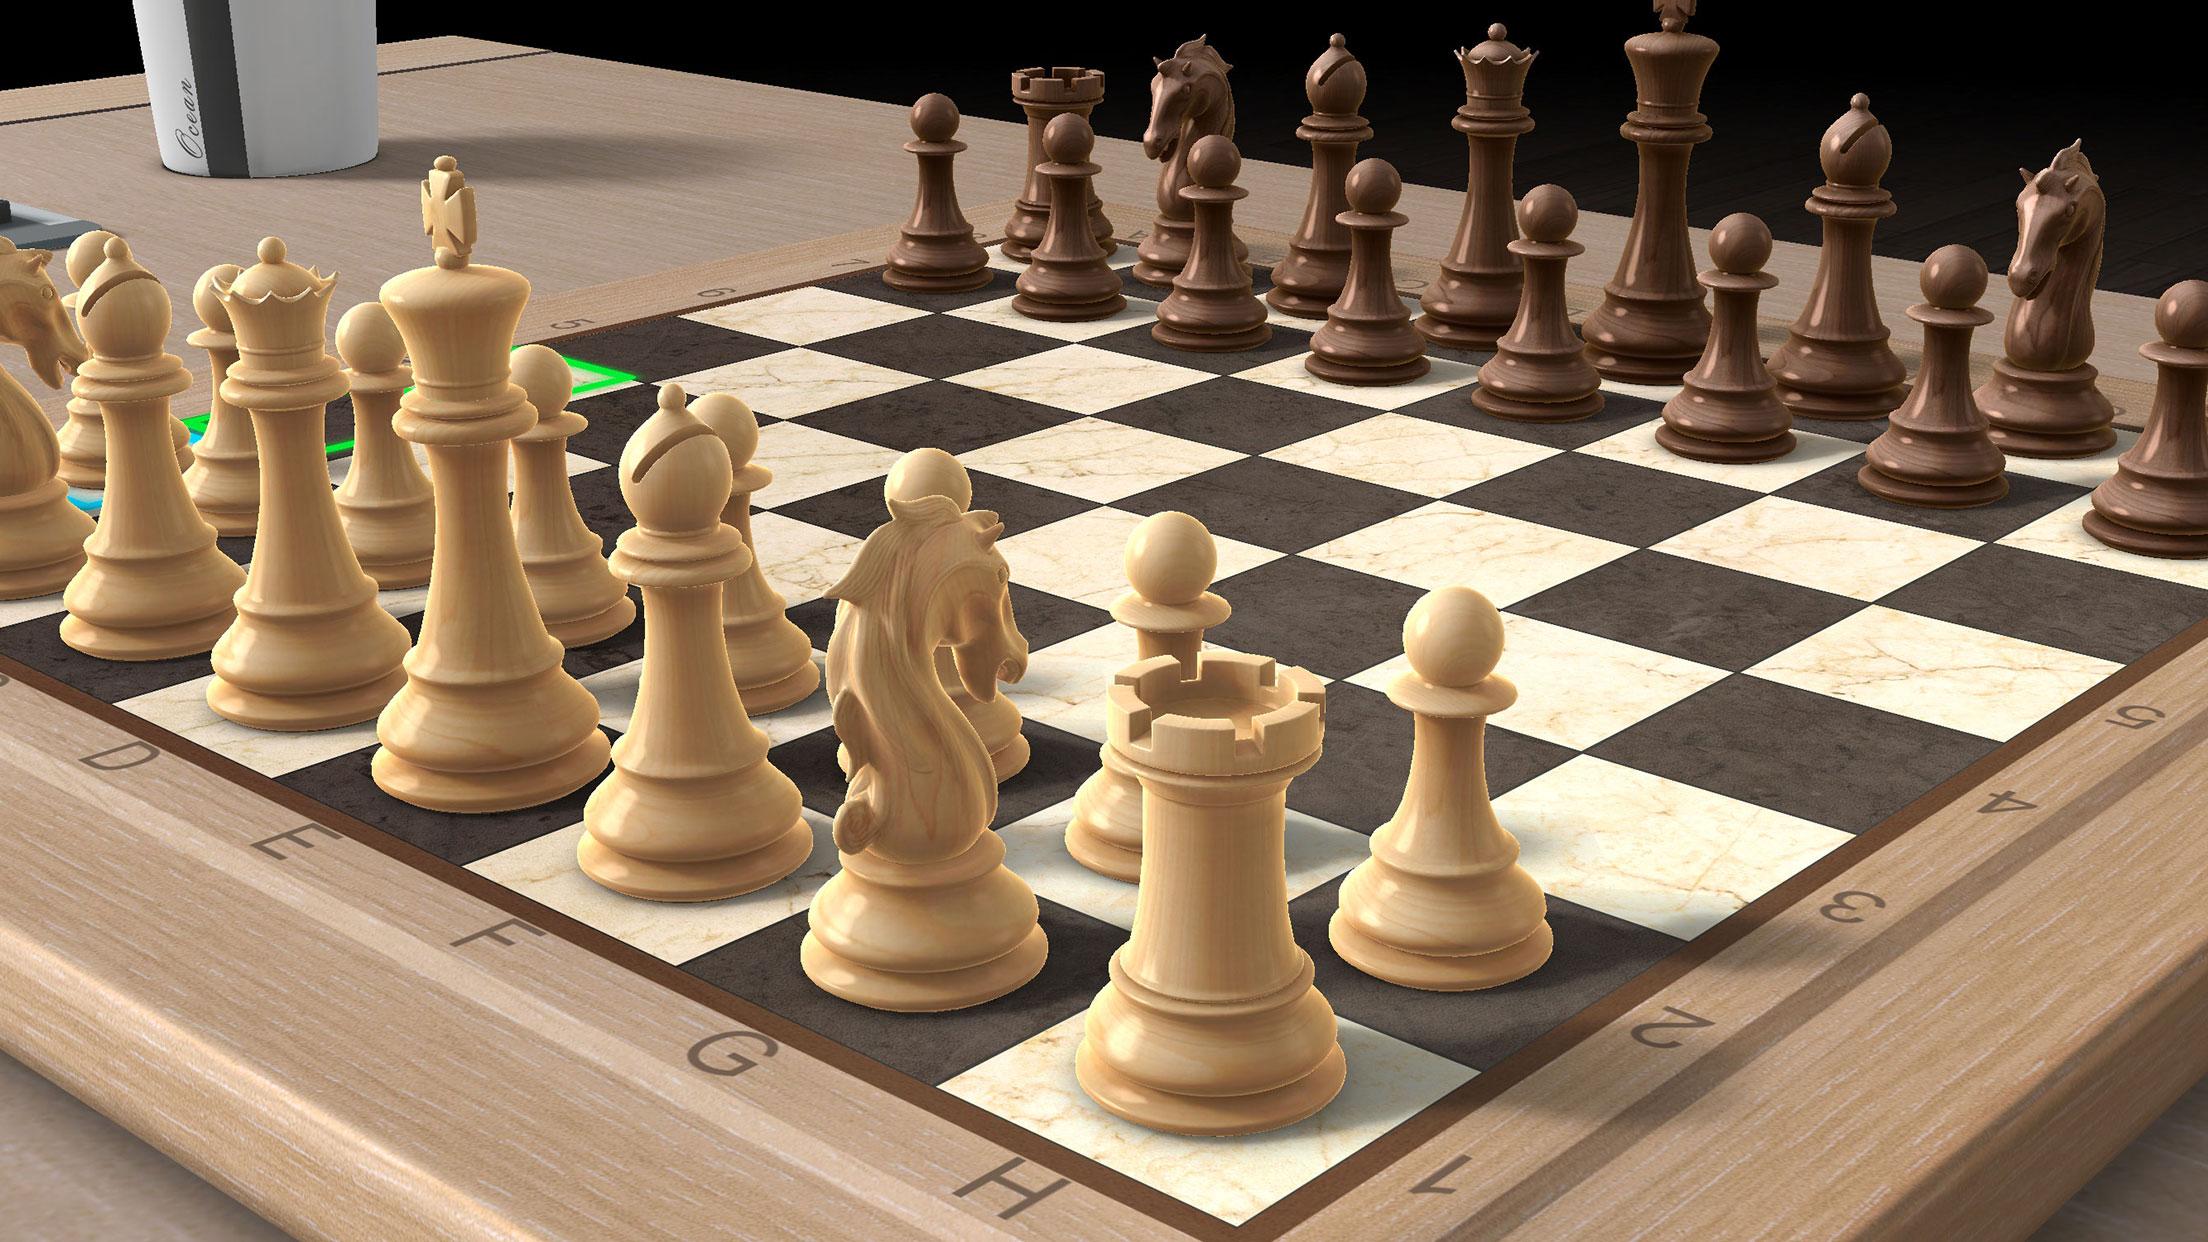 Play Real Chess 3D Online